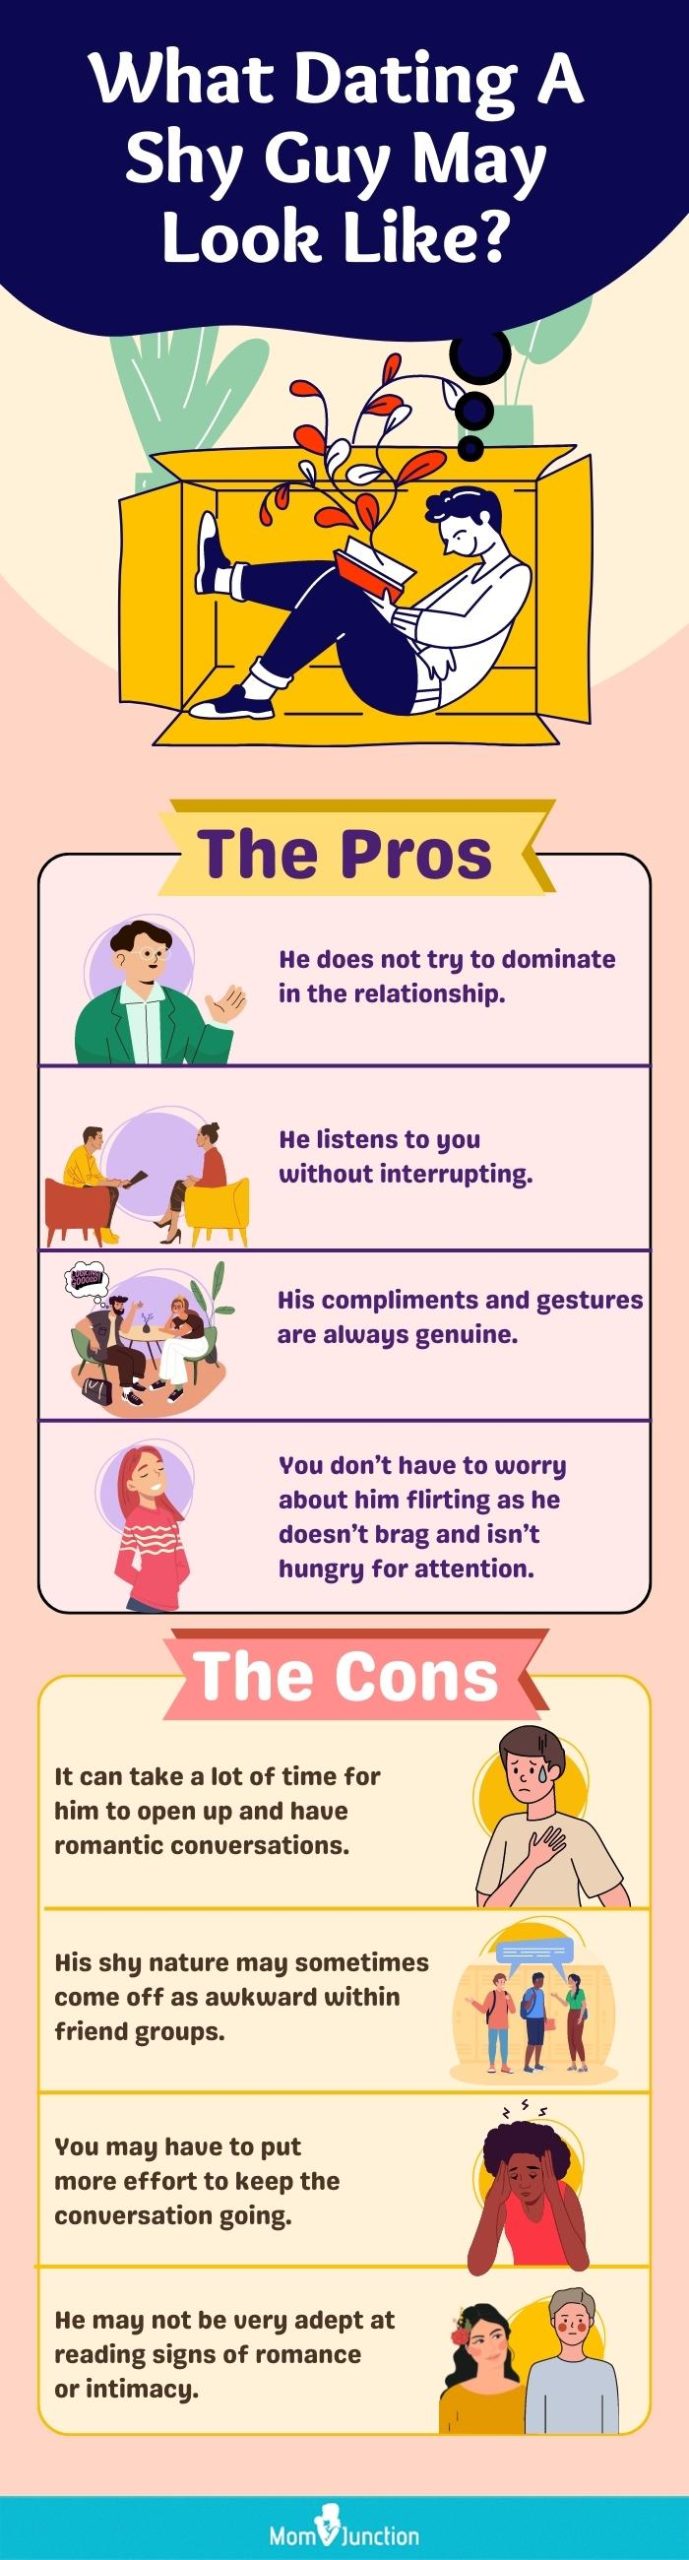 pros and cons of dating a shy guy (infographic)